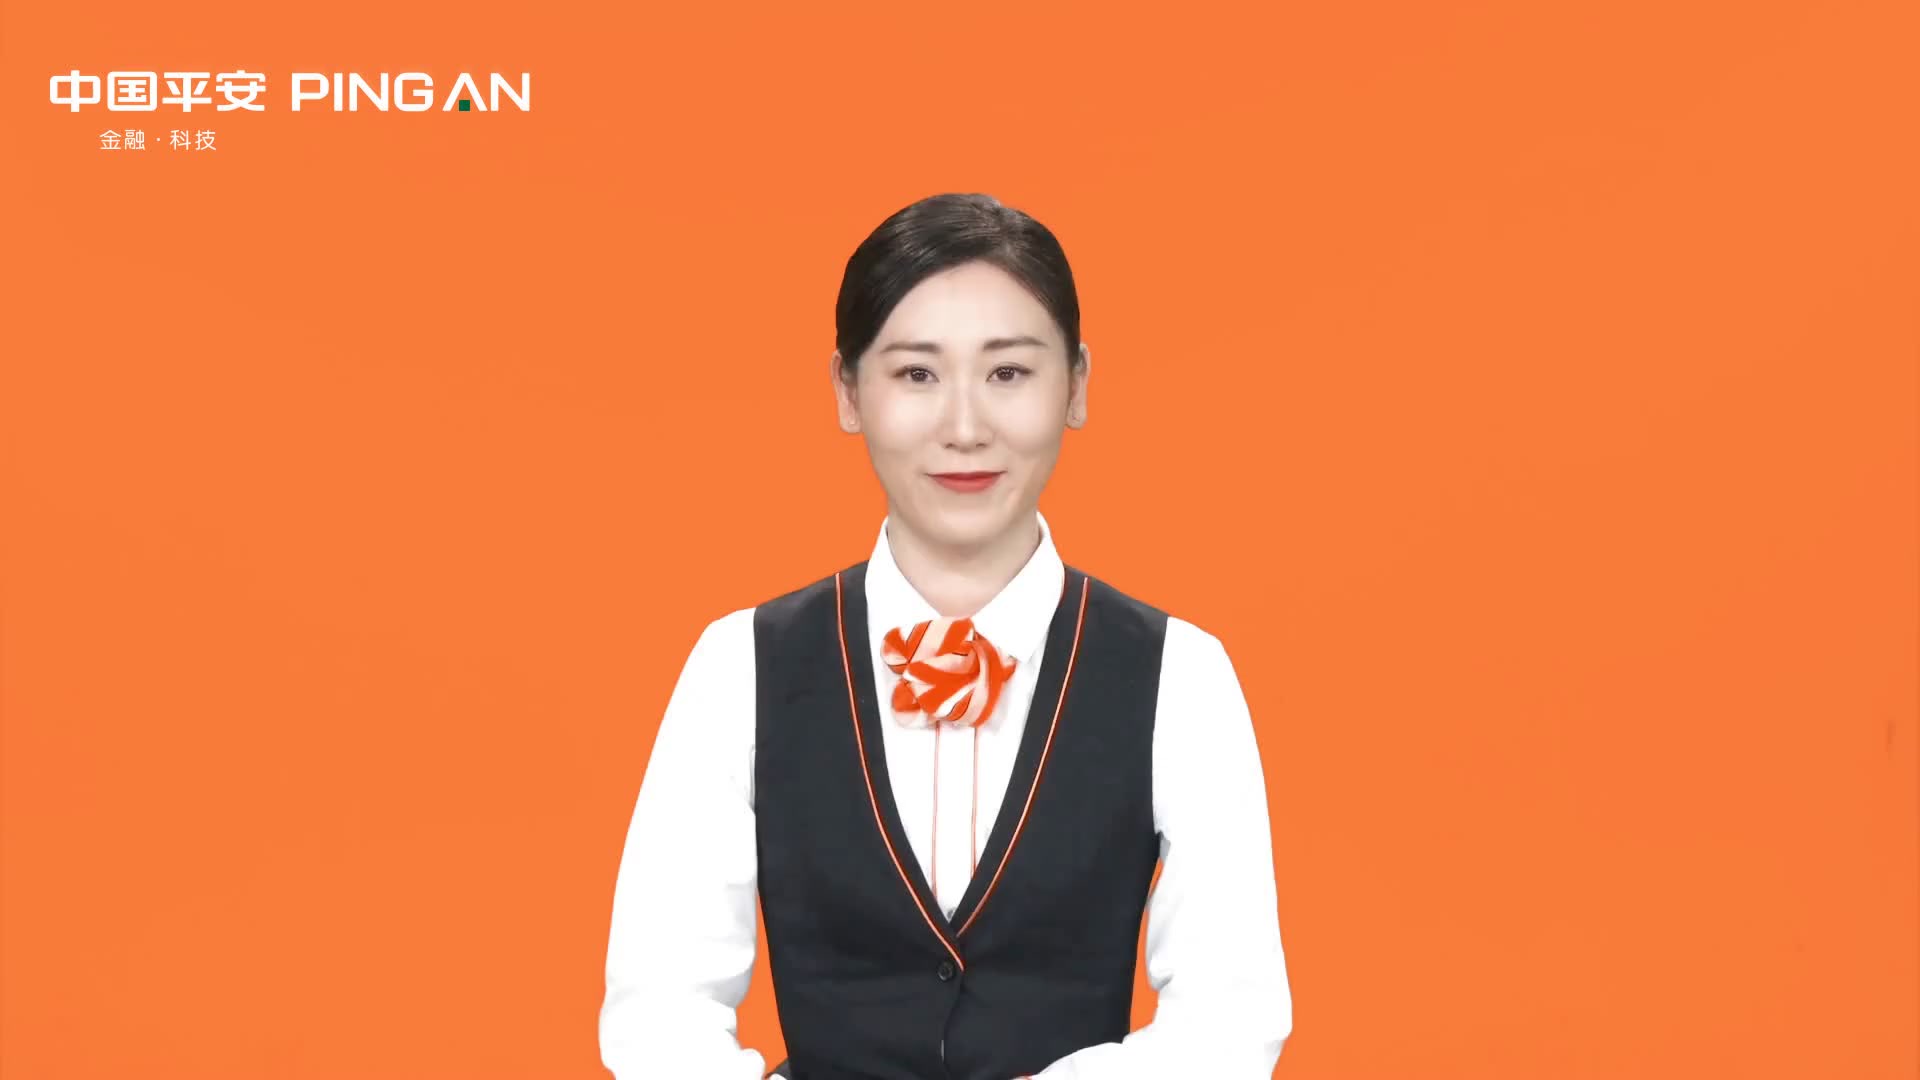 Sogou unveils AI financial assistant for Ping An, after creating AI news anchors for Xinhua and planning novel readers for Zhangyue